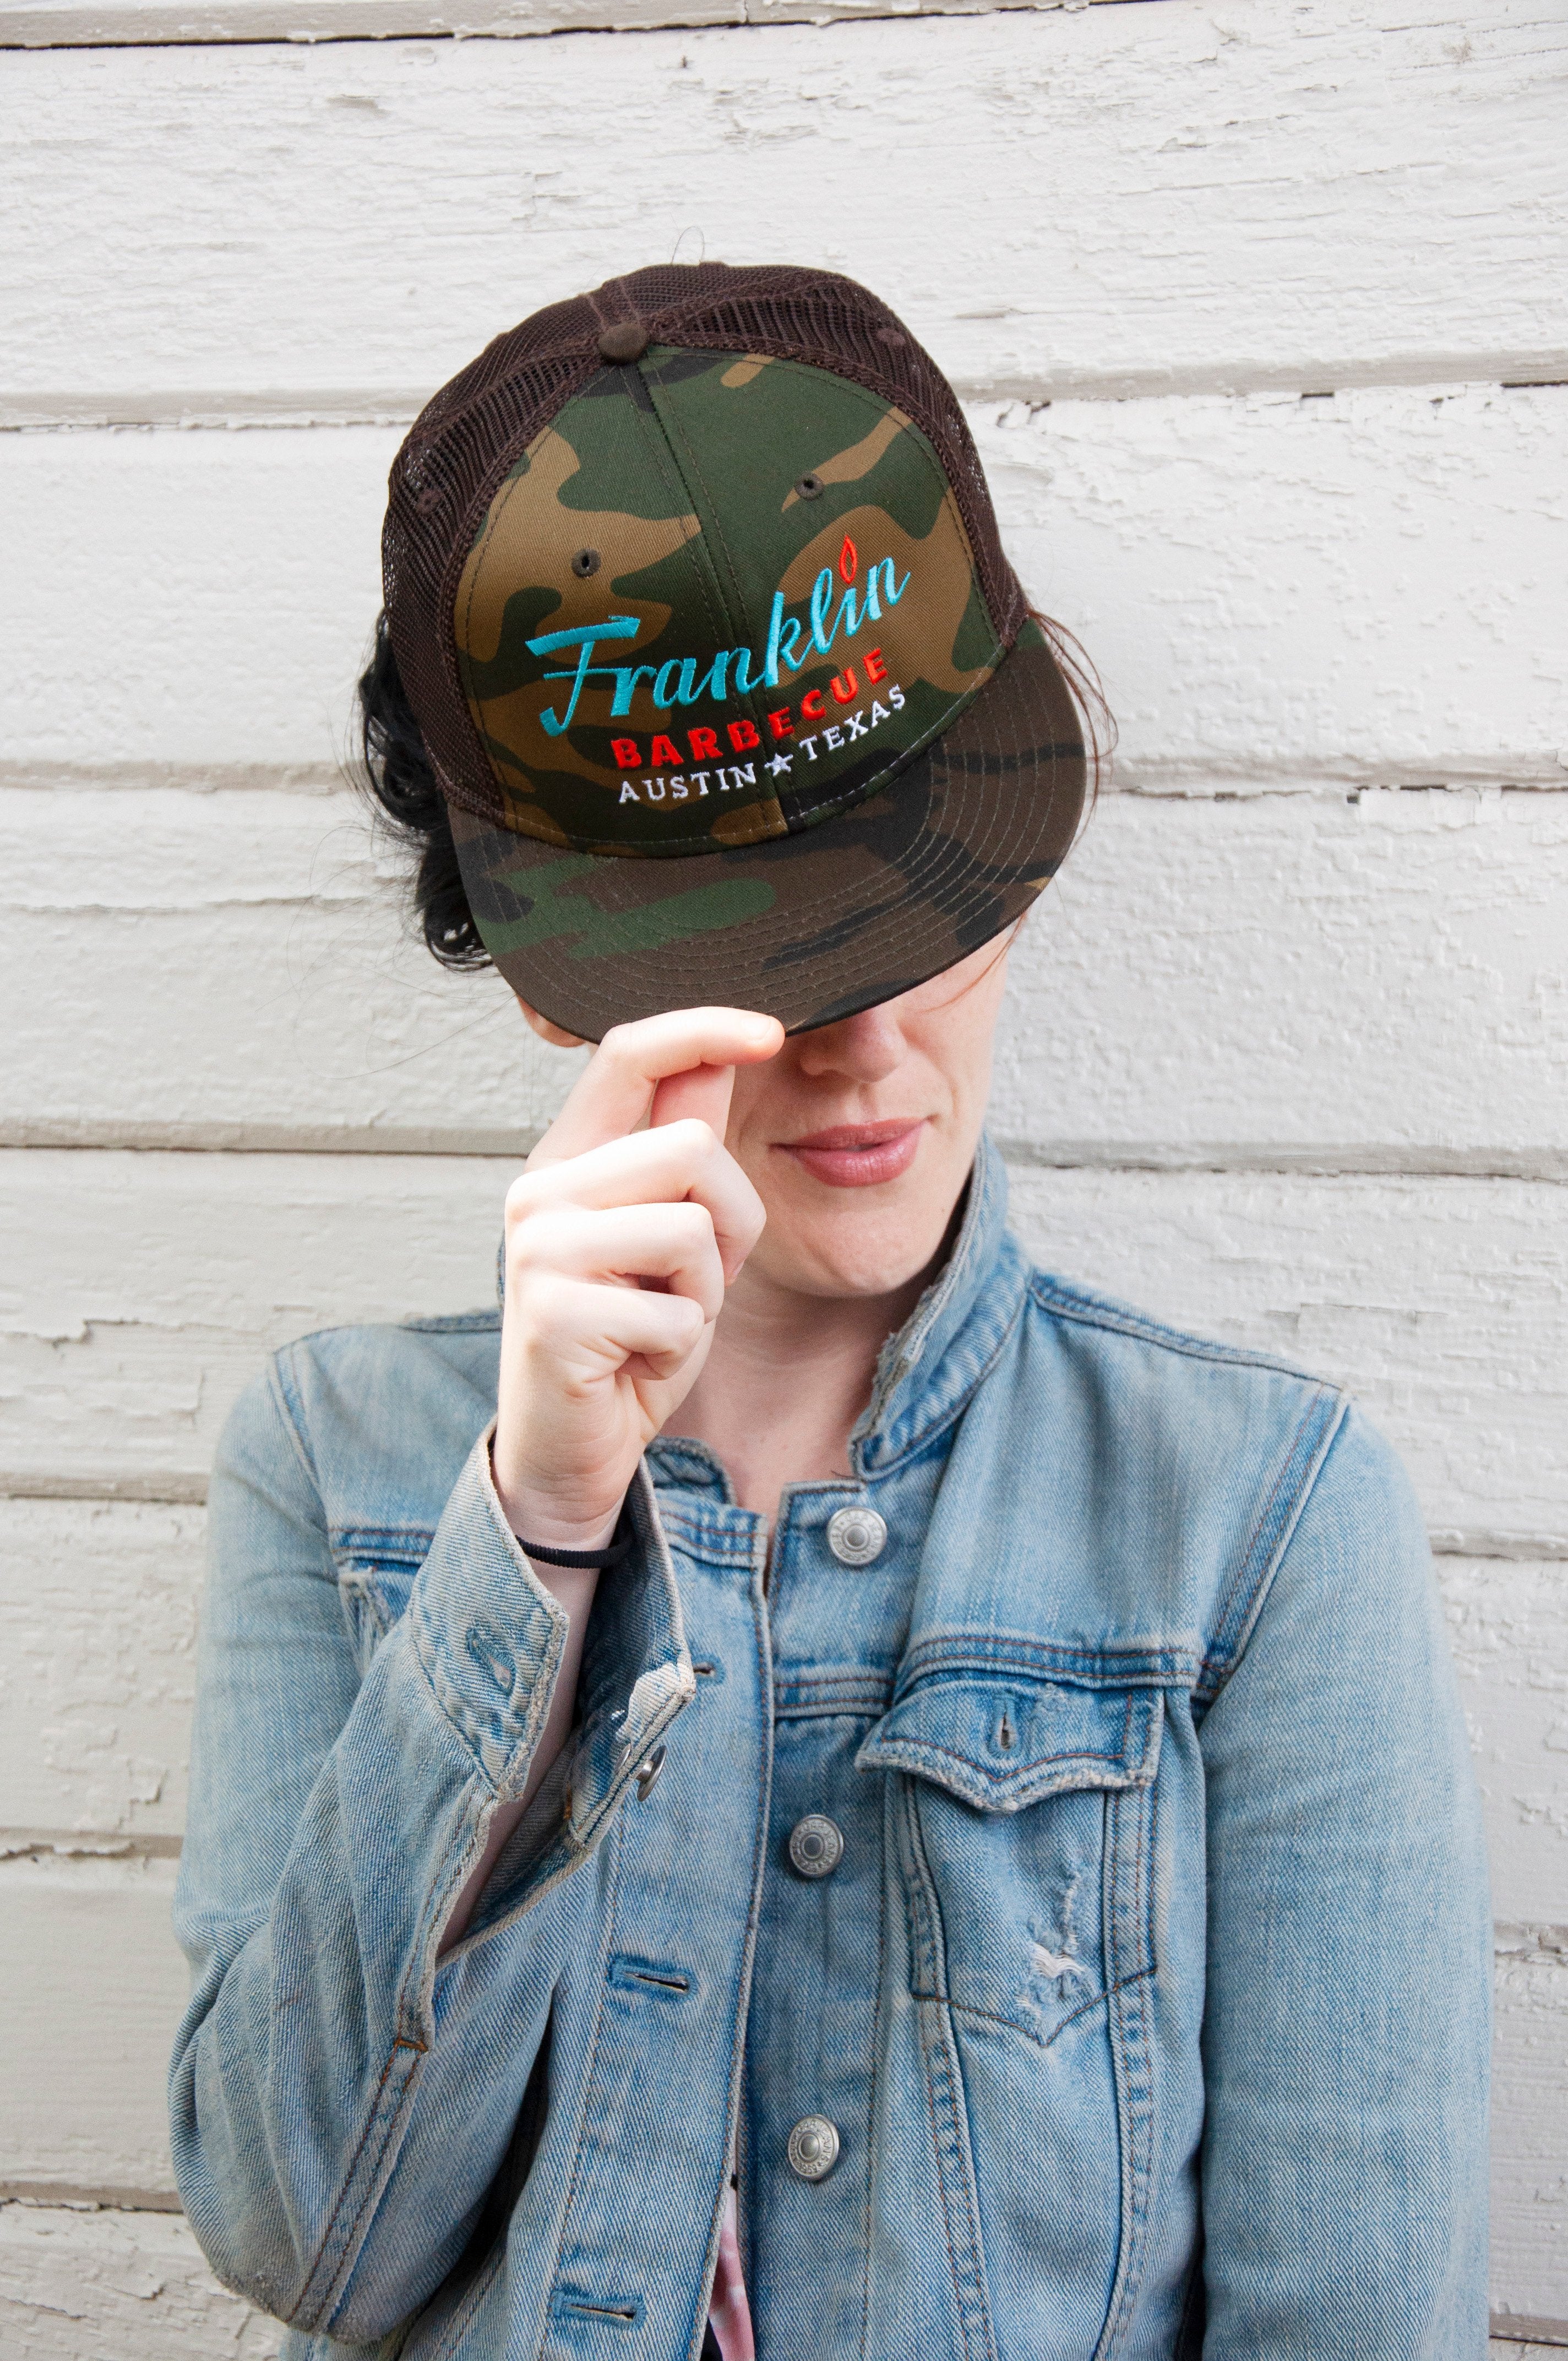 Person modeling Camouflage cap with Franklin Barbecue text logo in blue and orange. Below that is Austin Texas in white.